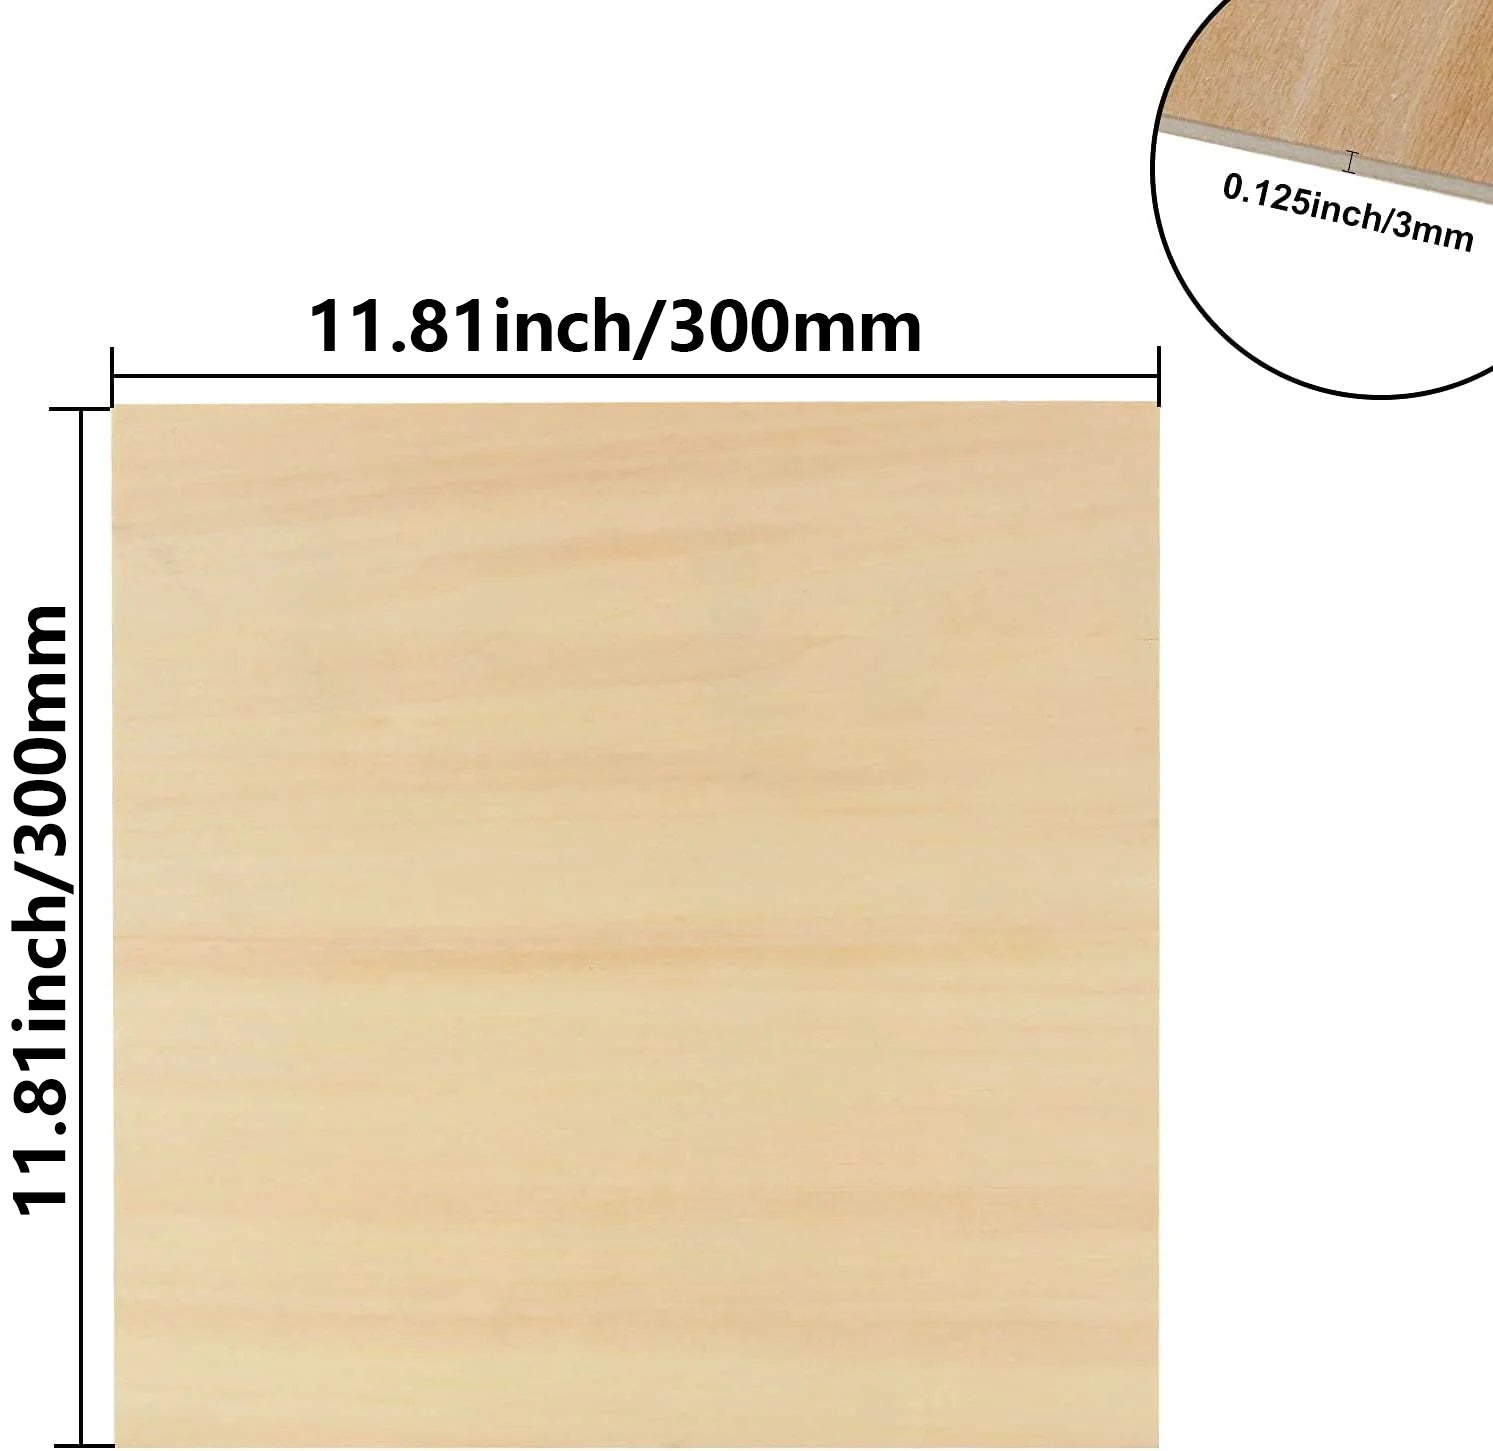 basswood sheet for laser cutting